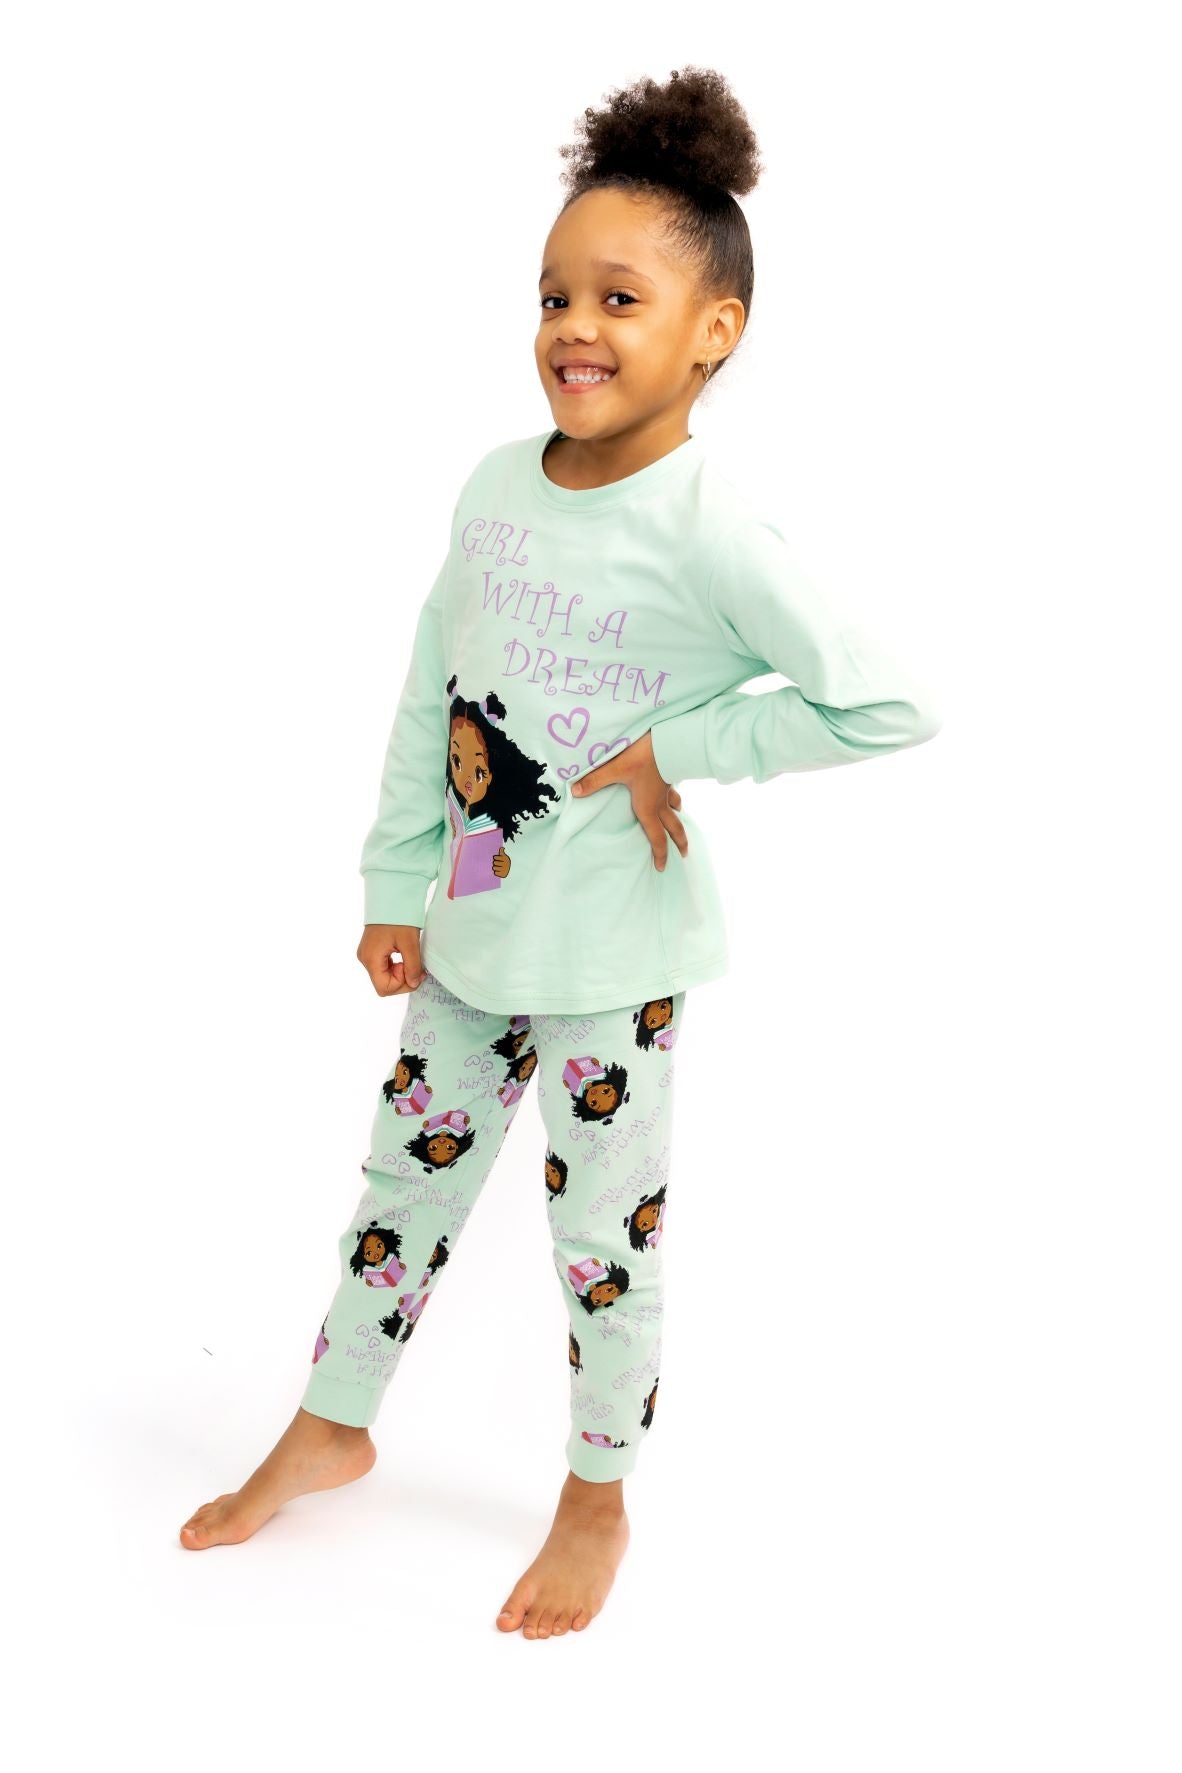 GIRL WITH A DREAM SWEET PAJAMA 2 PC SET SIZE TODDLER 2T - 14 FROSTED MINT